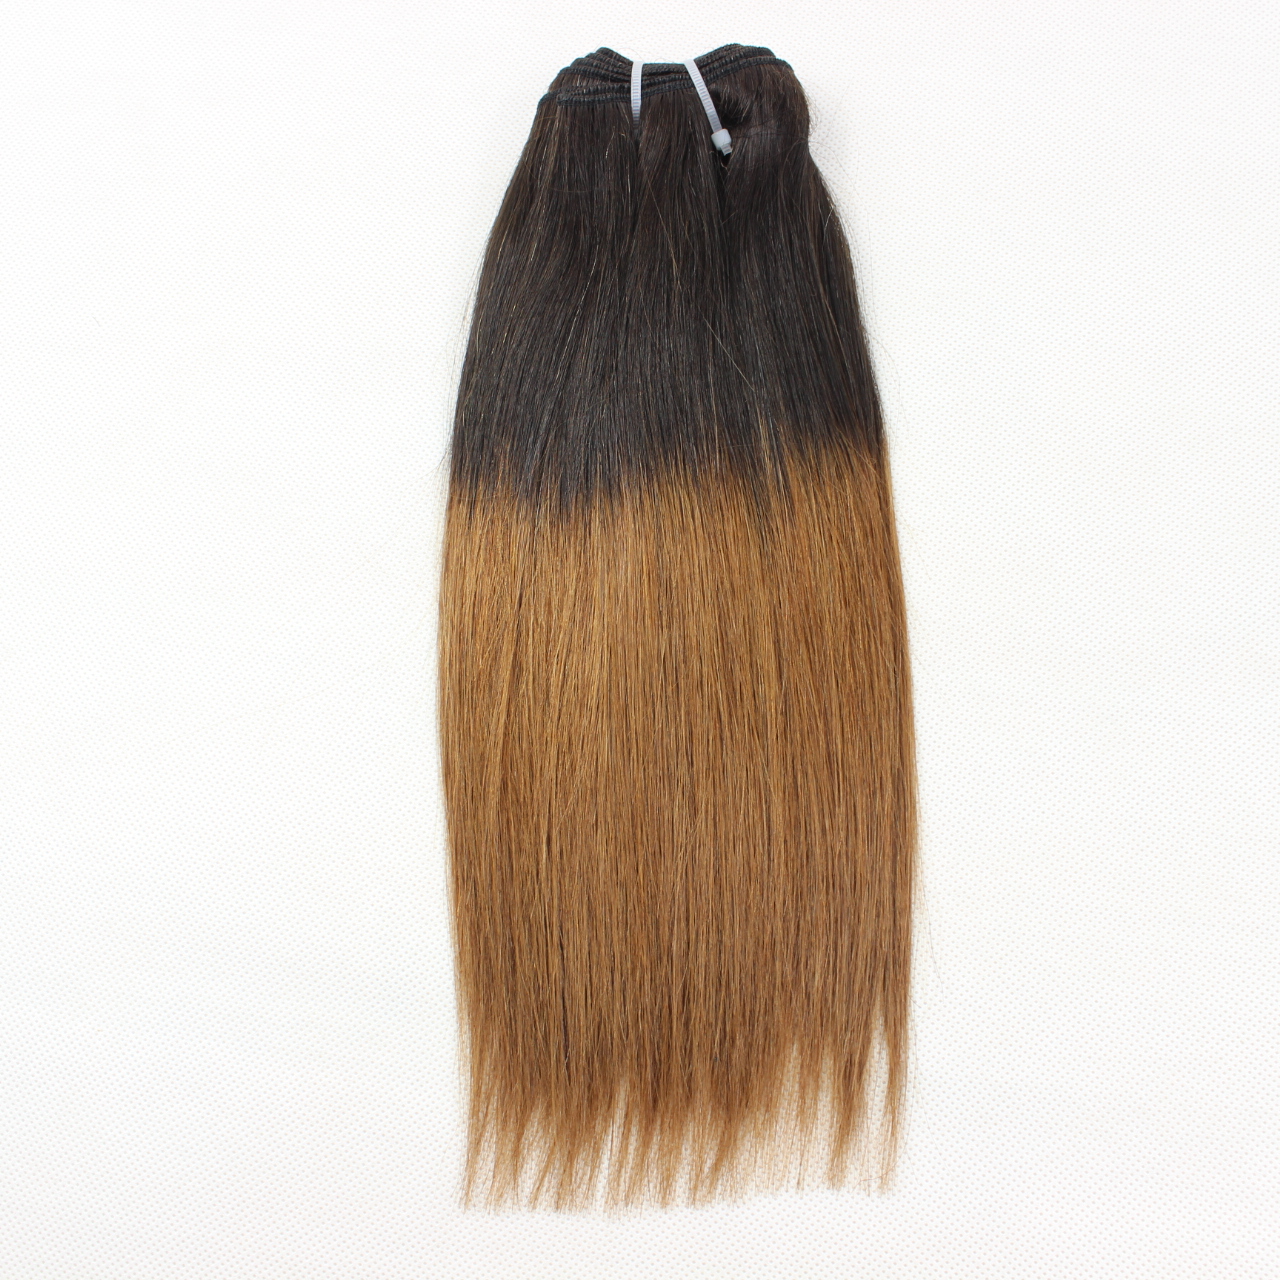  Ombre 1B/Brown 2T Color 100% Human Hair Weft Extensions YL167